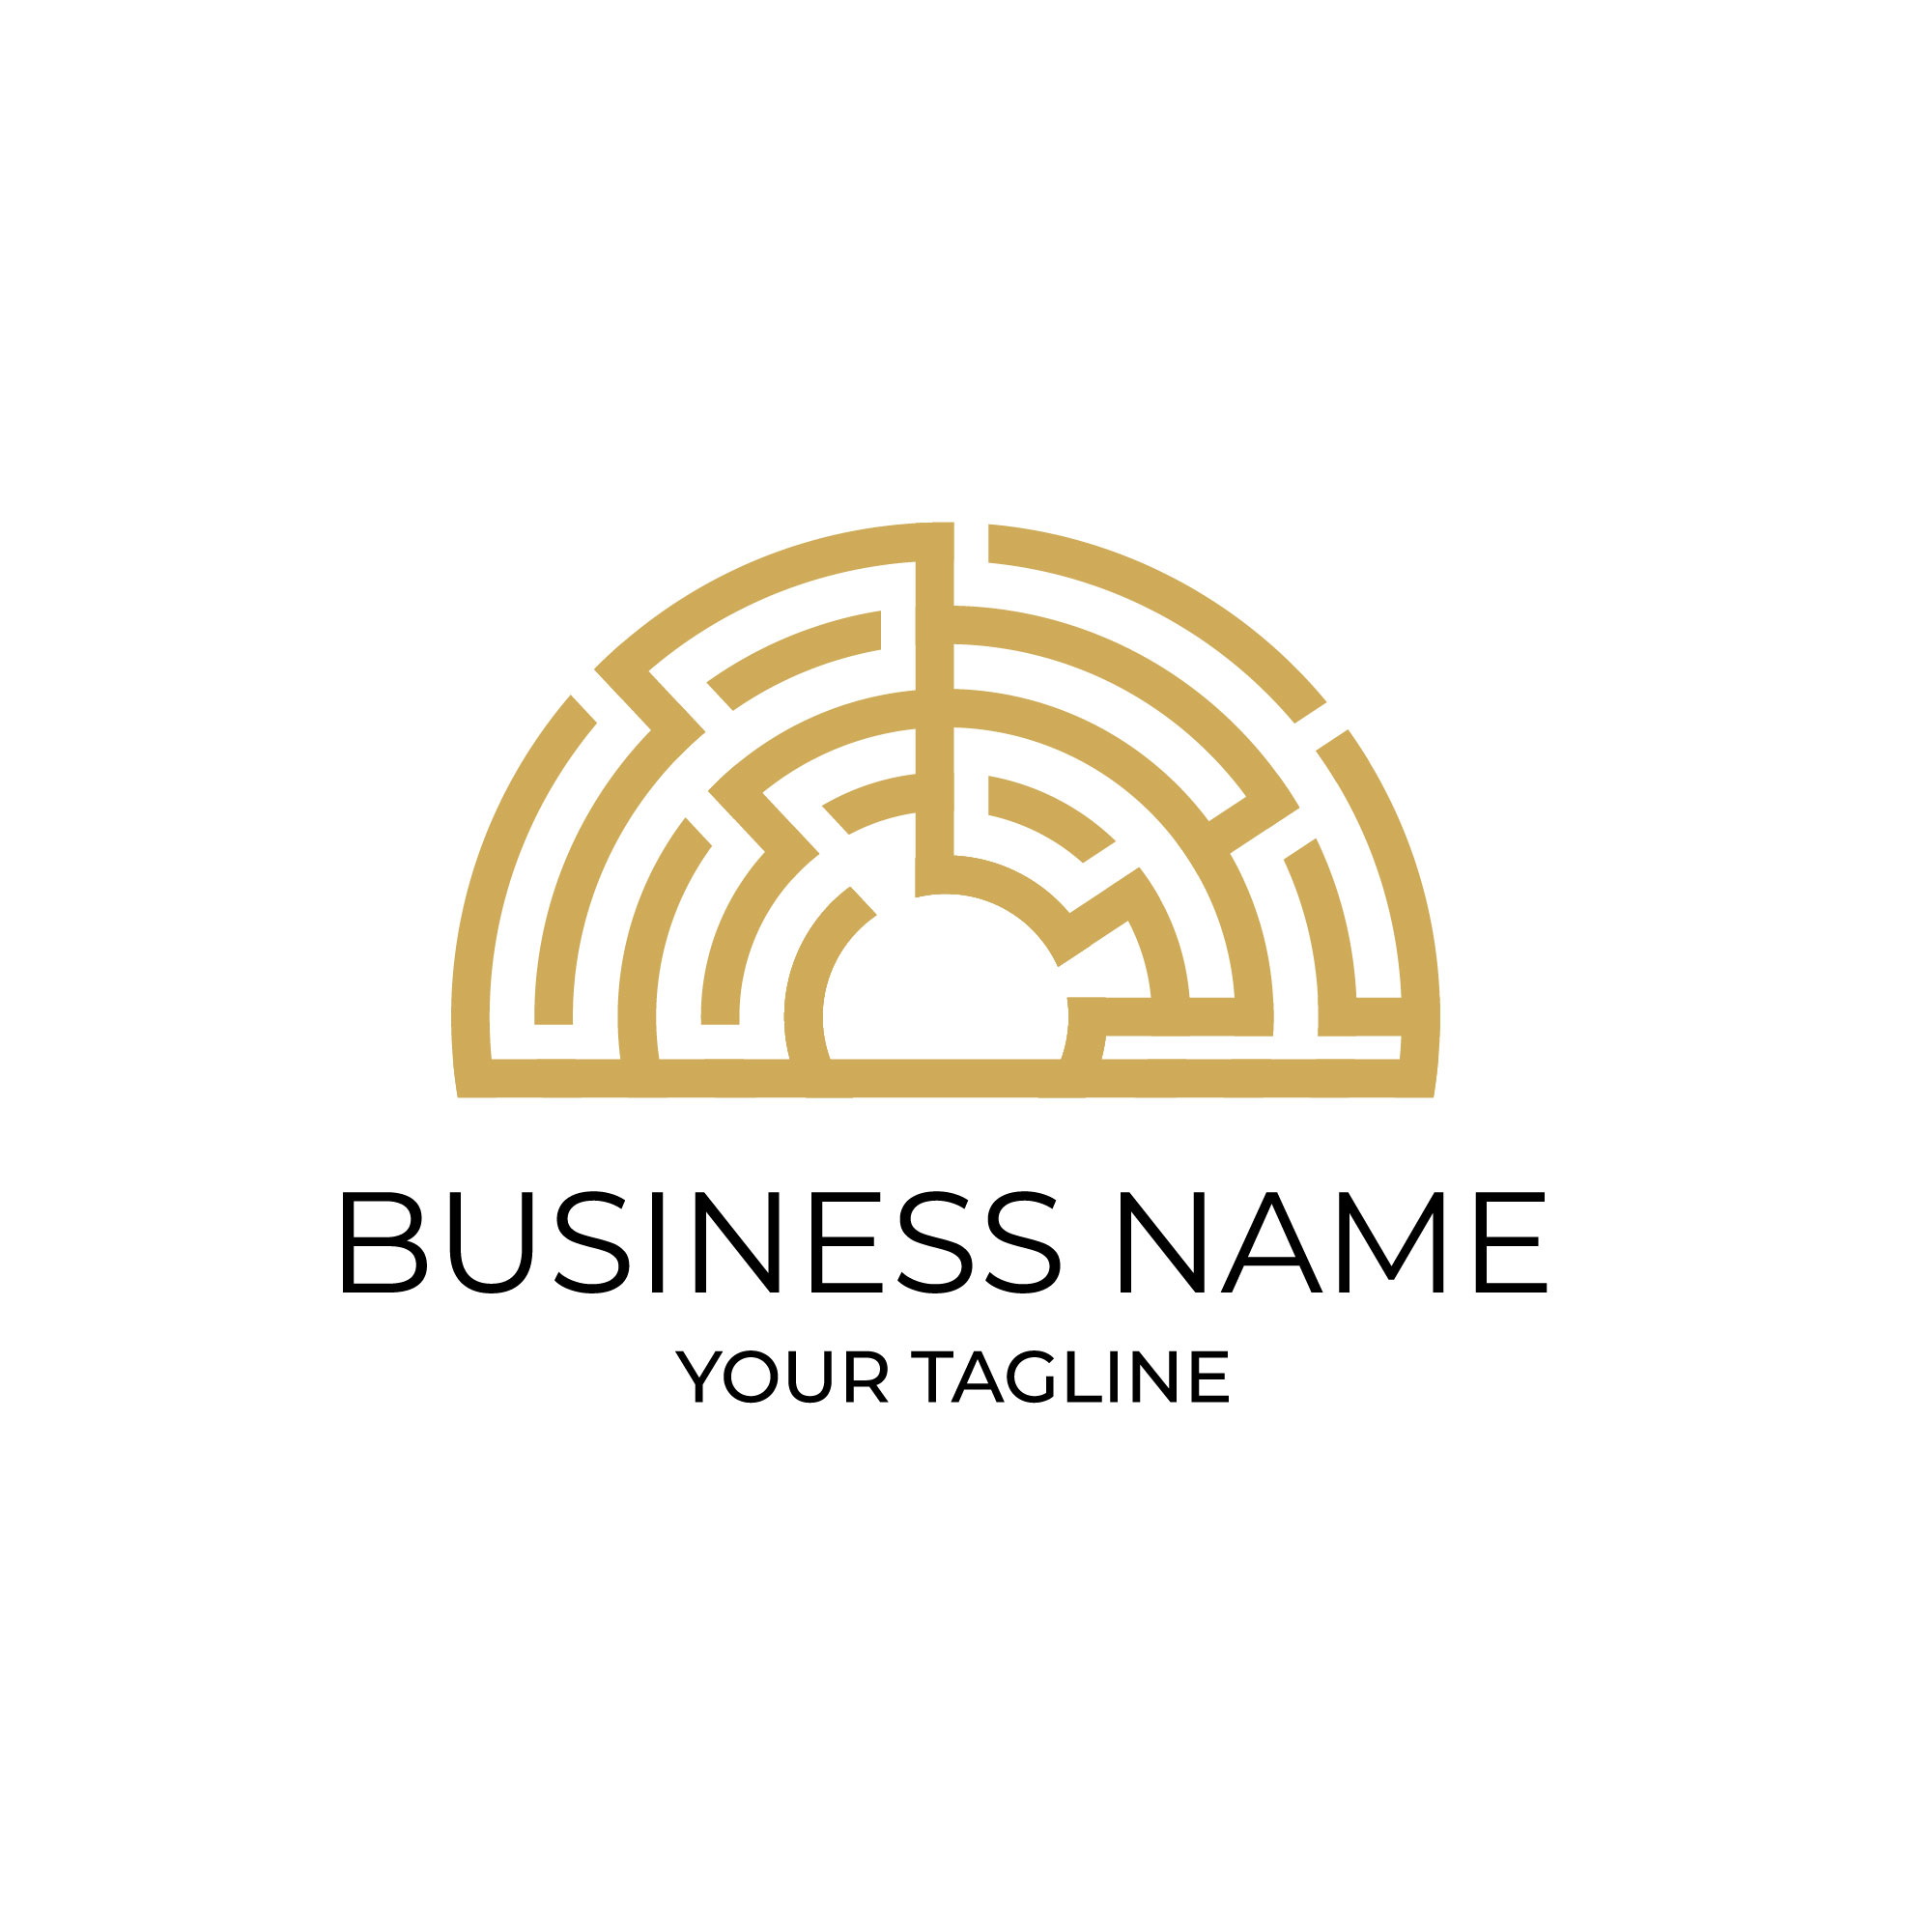 Creative maze business logo with golden color